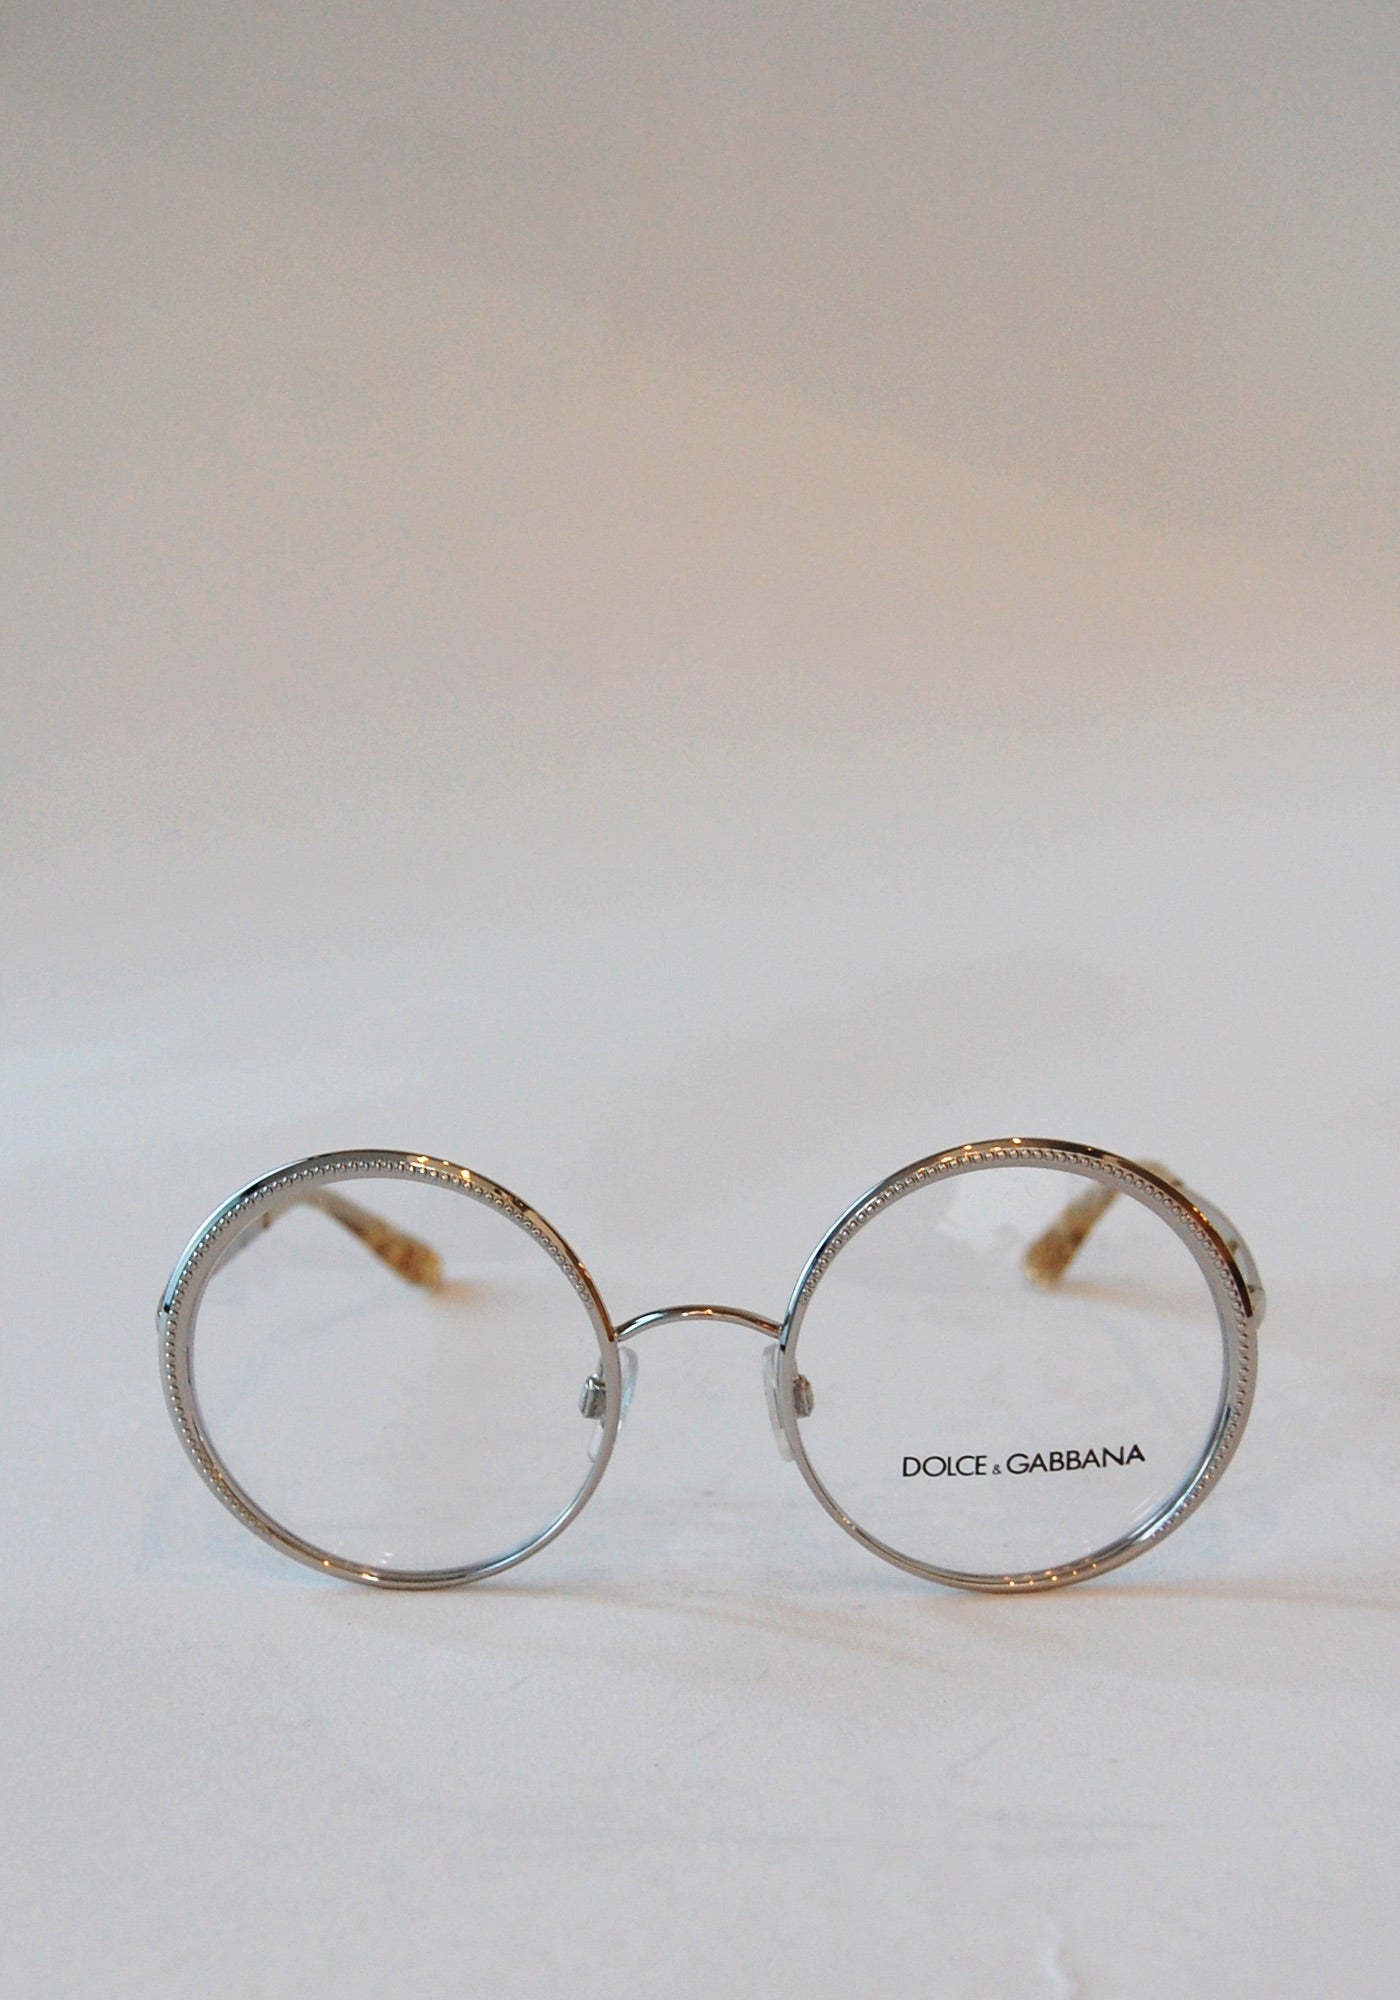 Dolce and Gabbana Silver Glasses